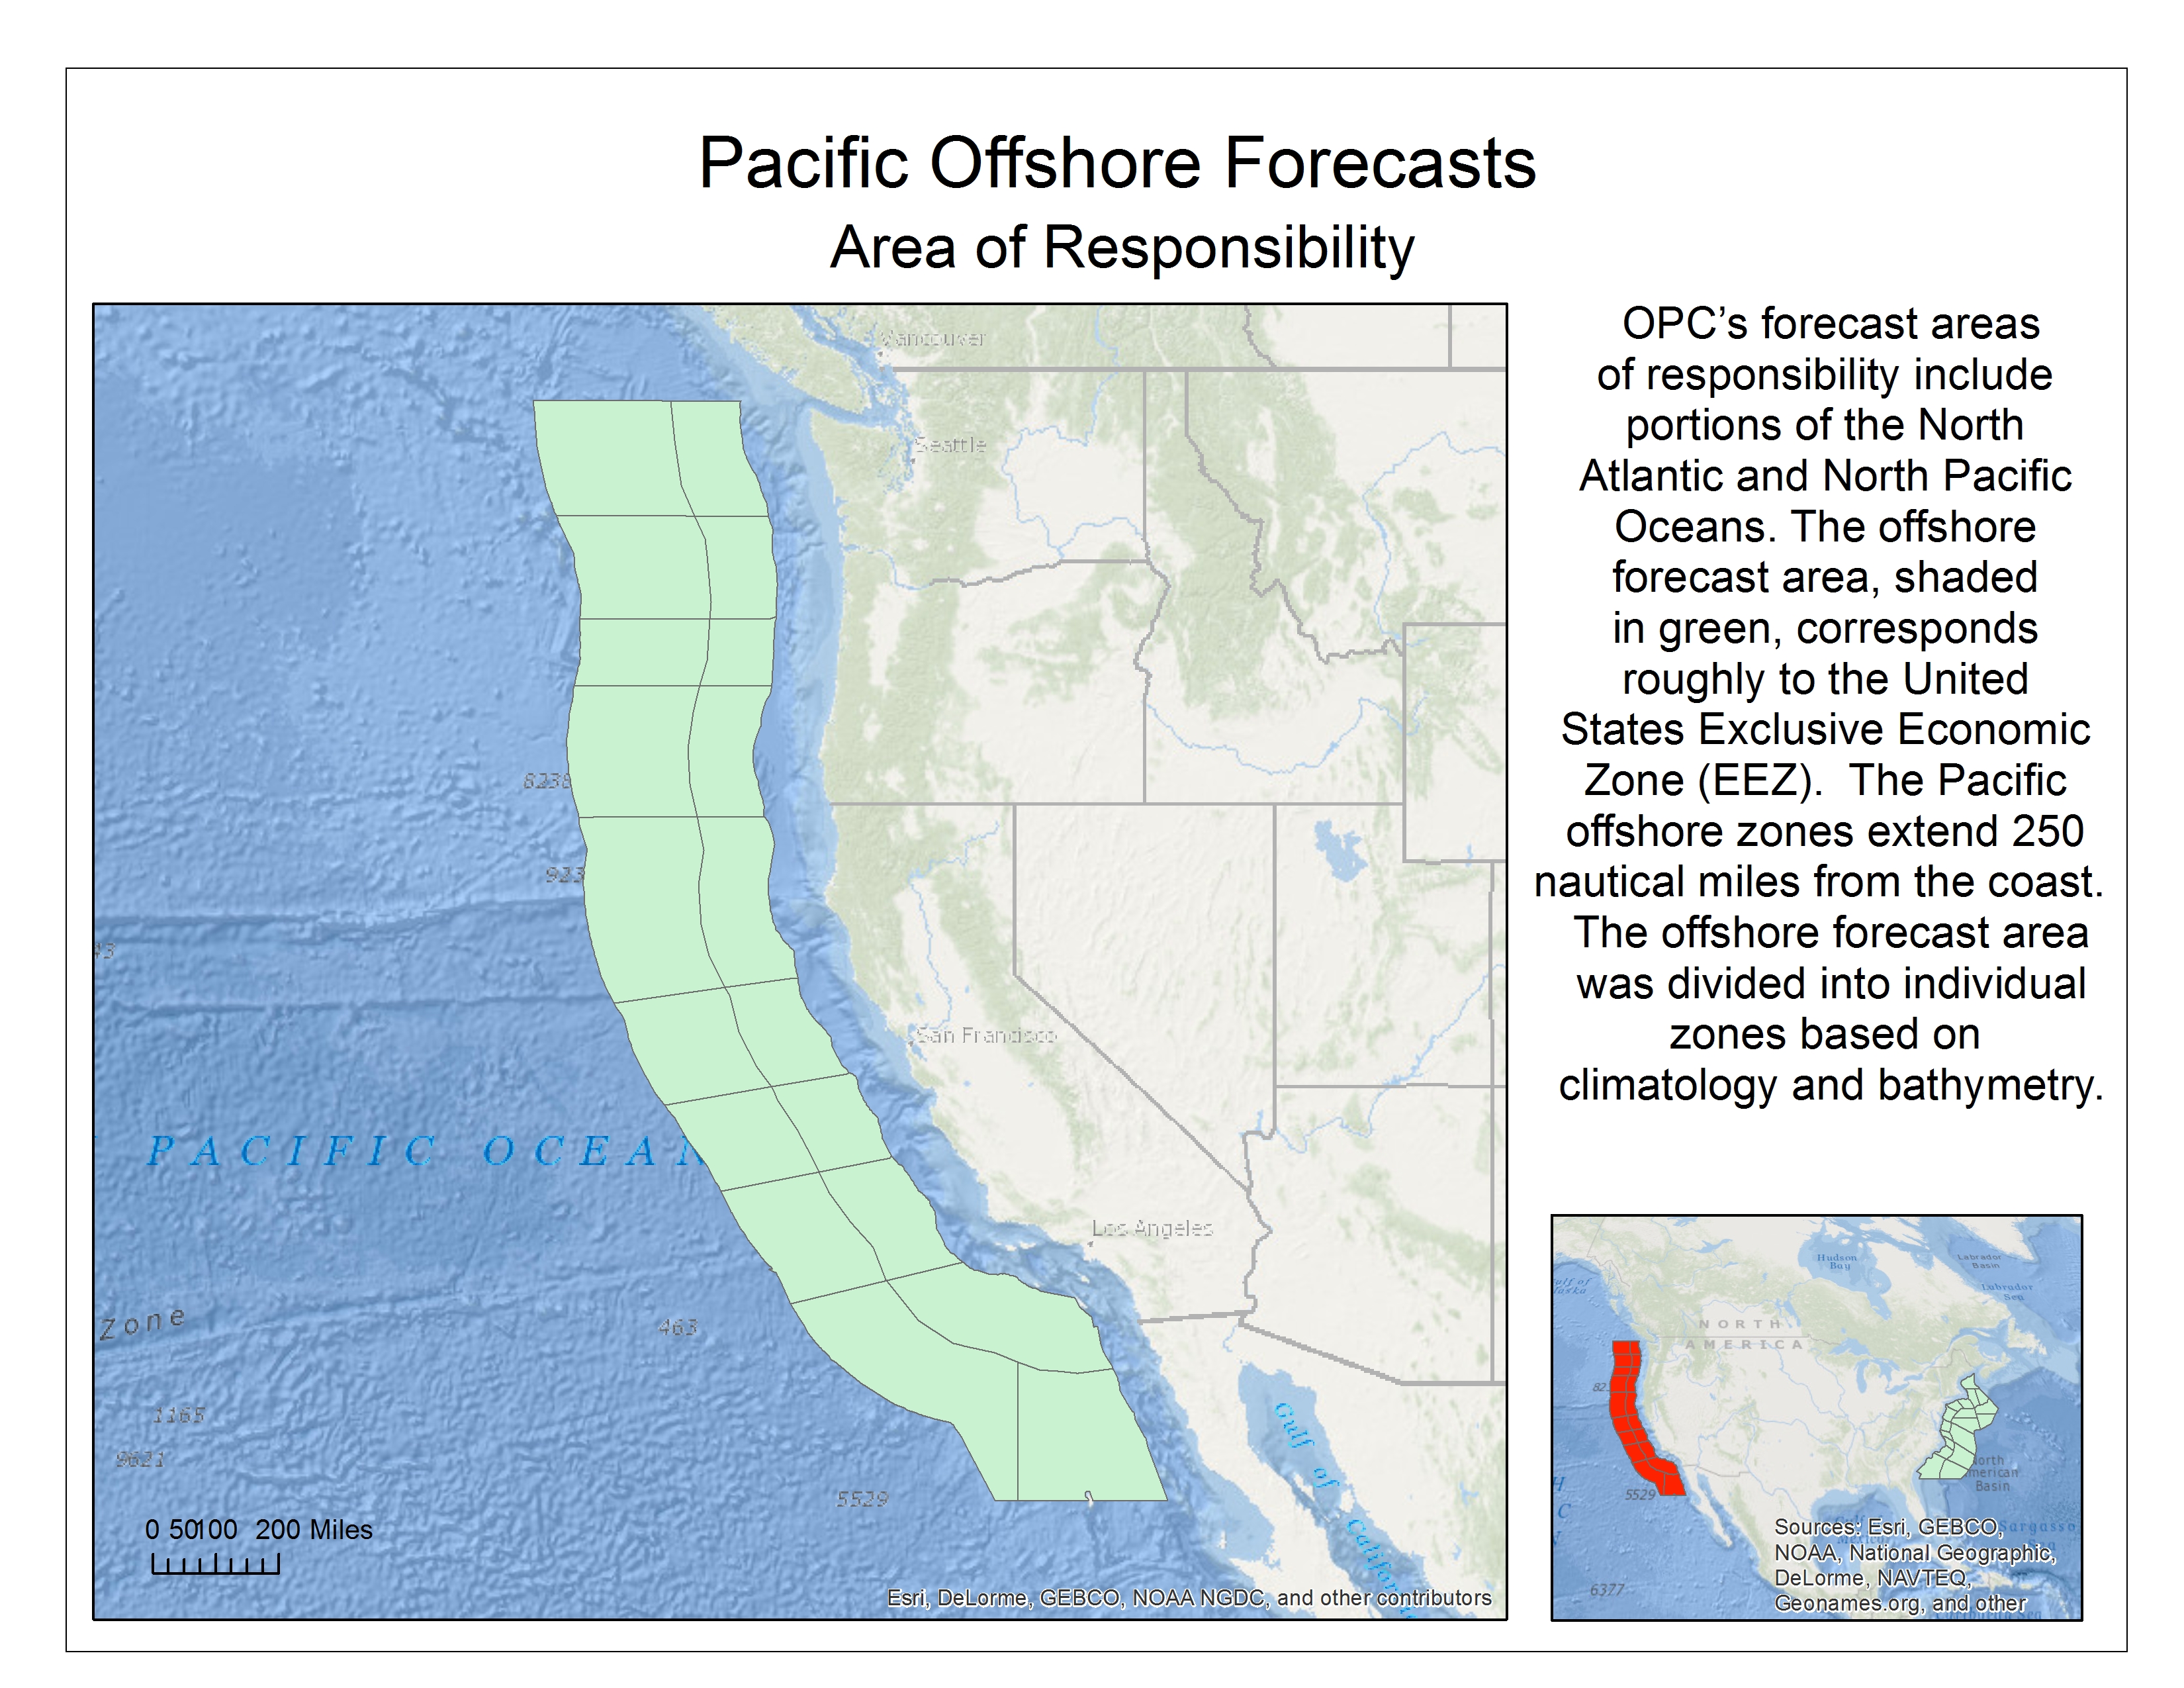 Pacific Offshore Area of Responsibility